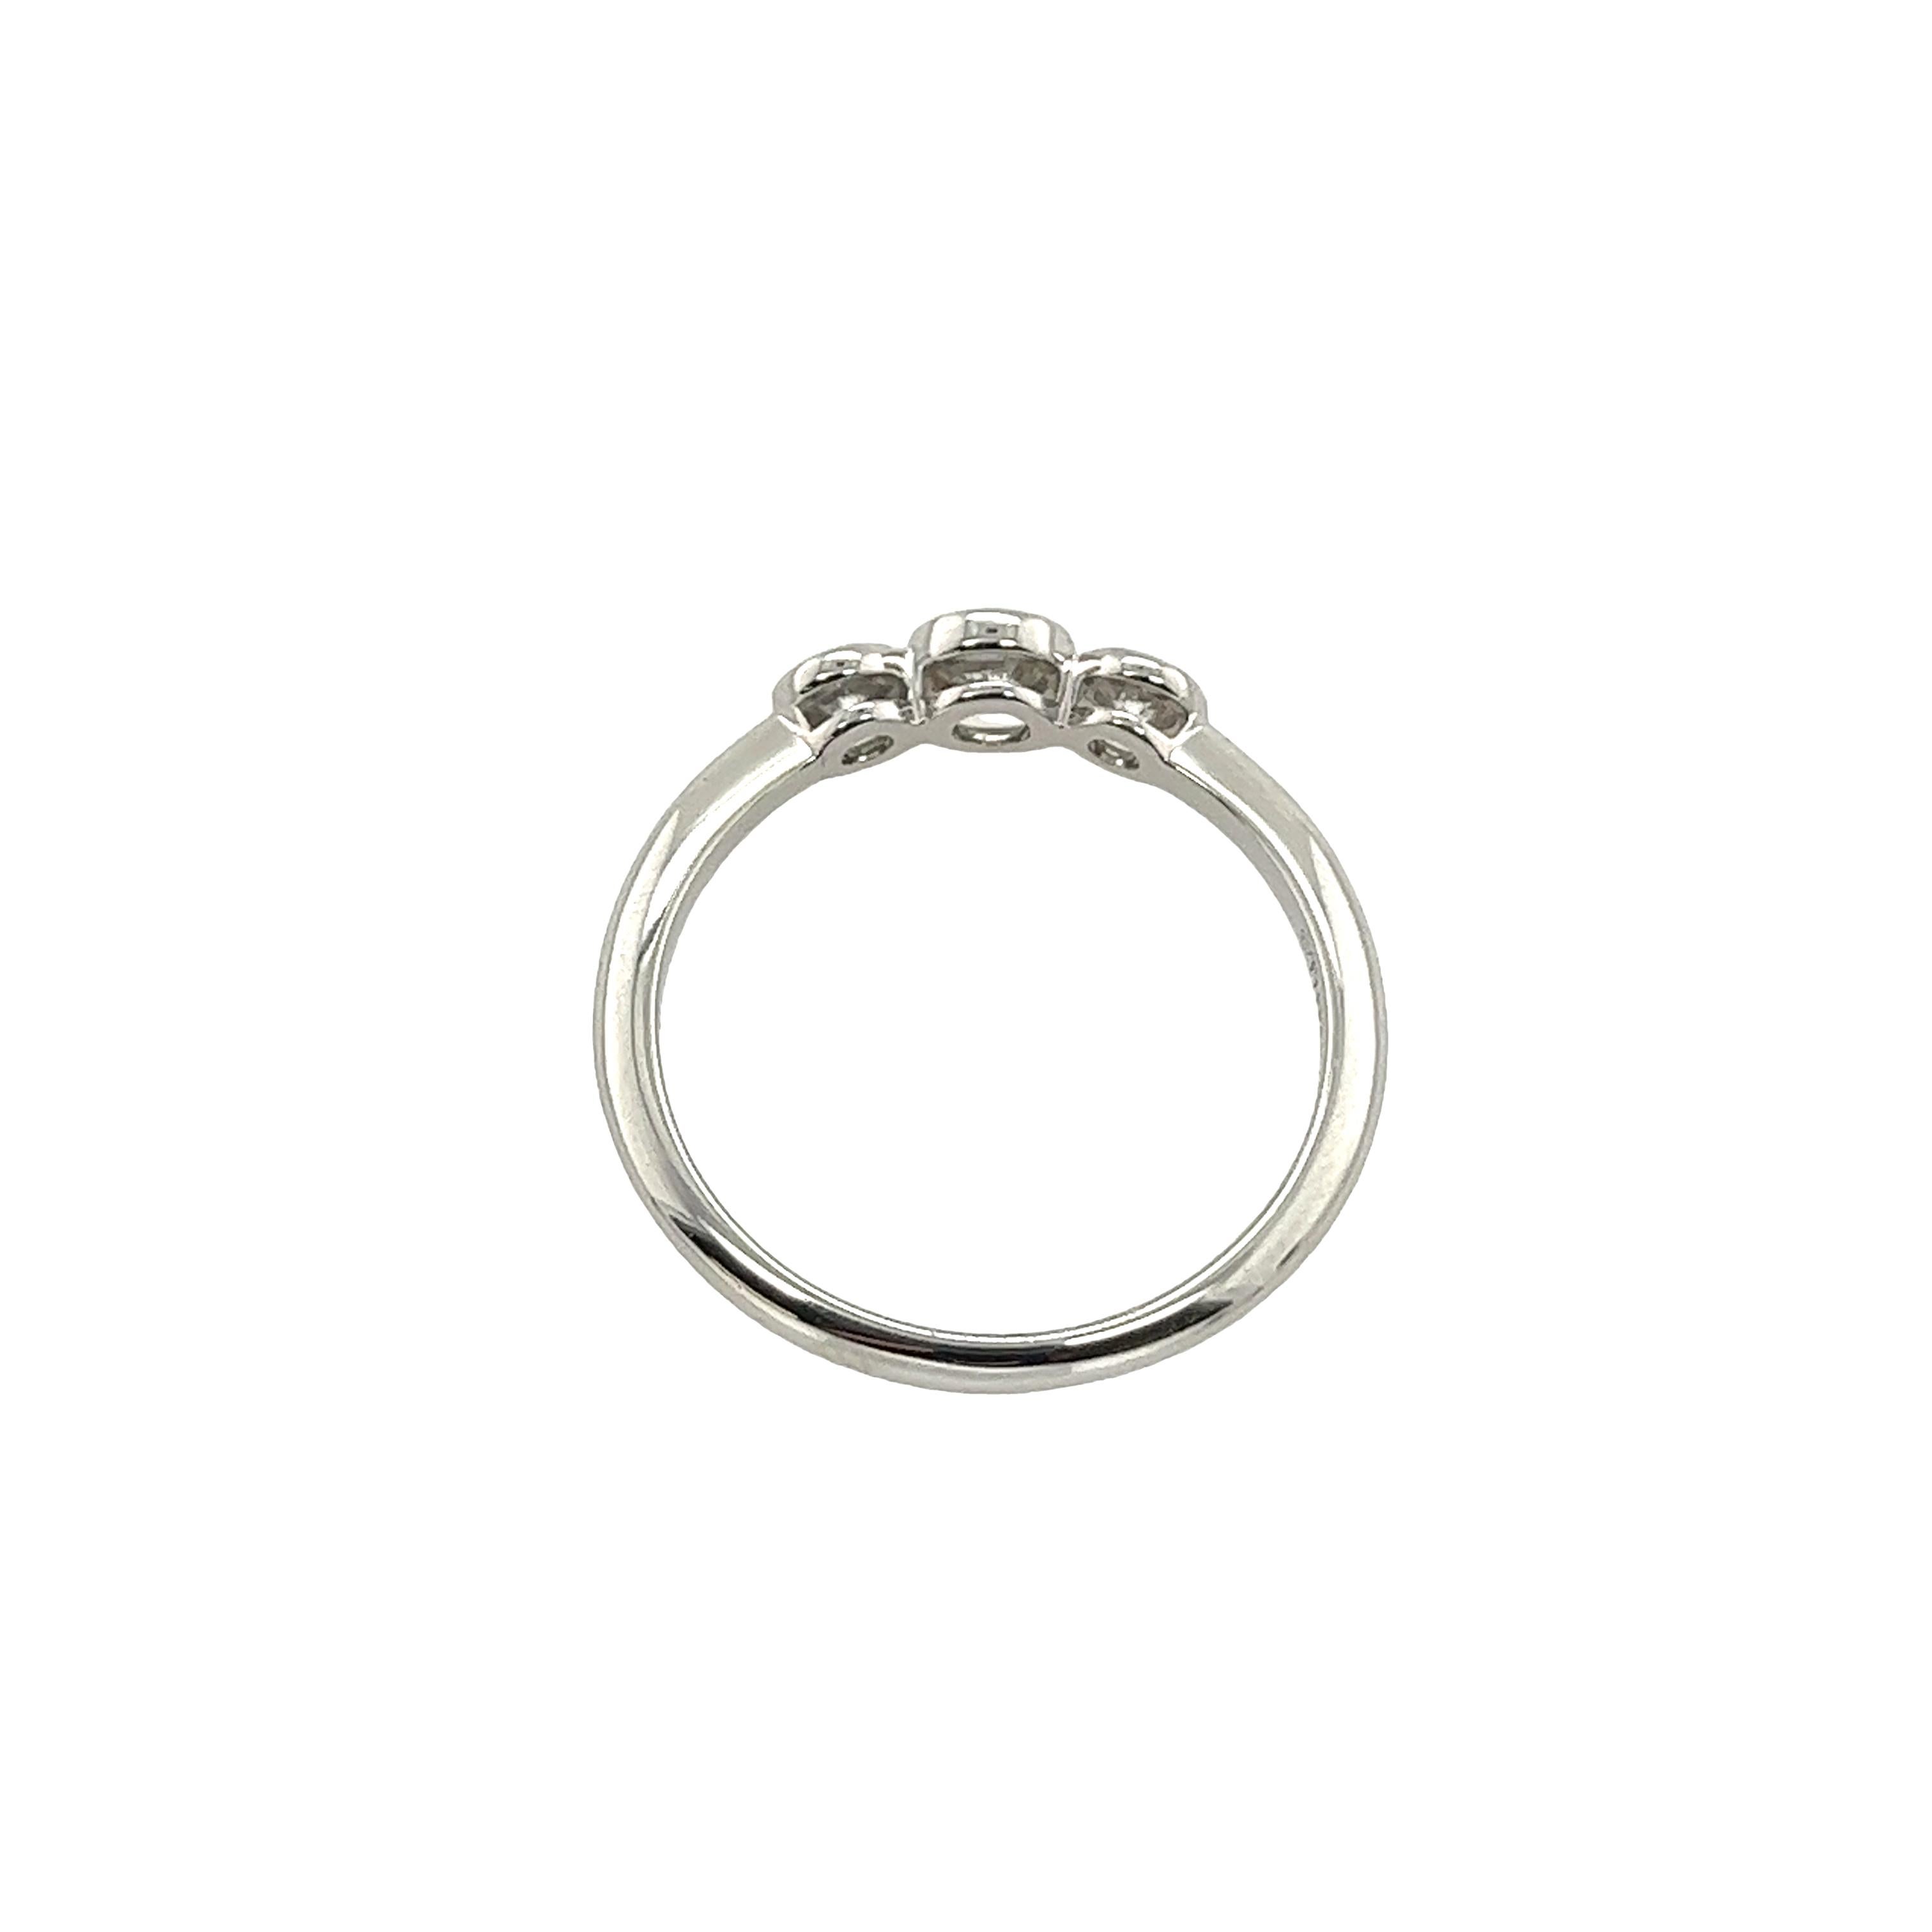 This ring features three exquisite diamonds set in platinum, with each diamond typically held securely in place by a bezel setting. The bezel setting adds a modern and sleek touch to the classic three-stone ring design.

Total Diamond Weight: